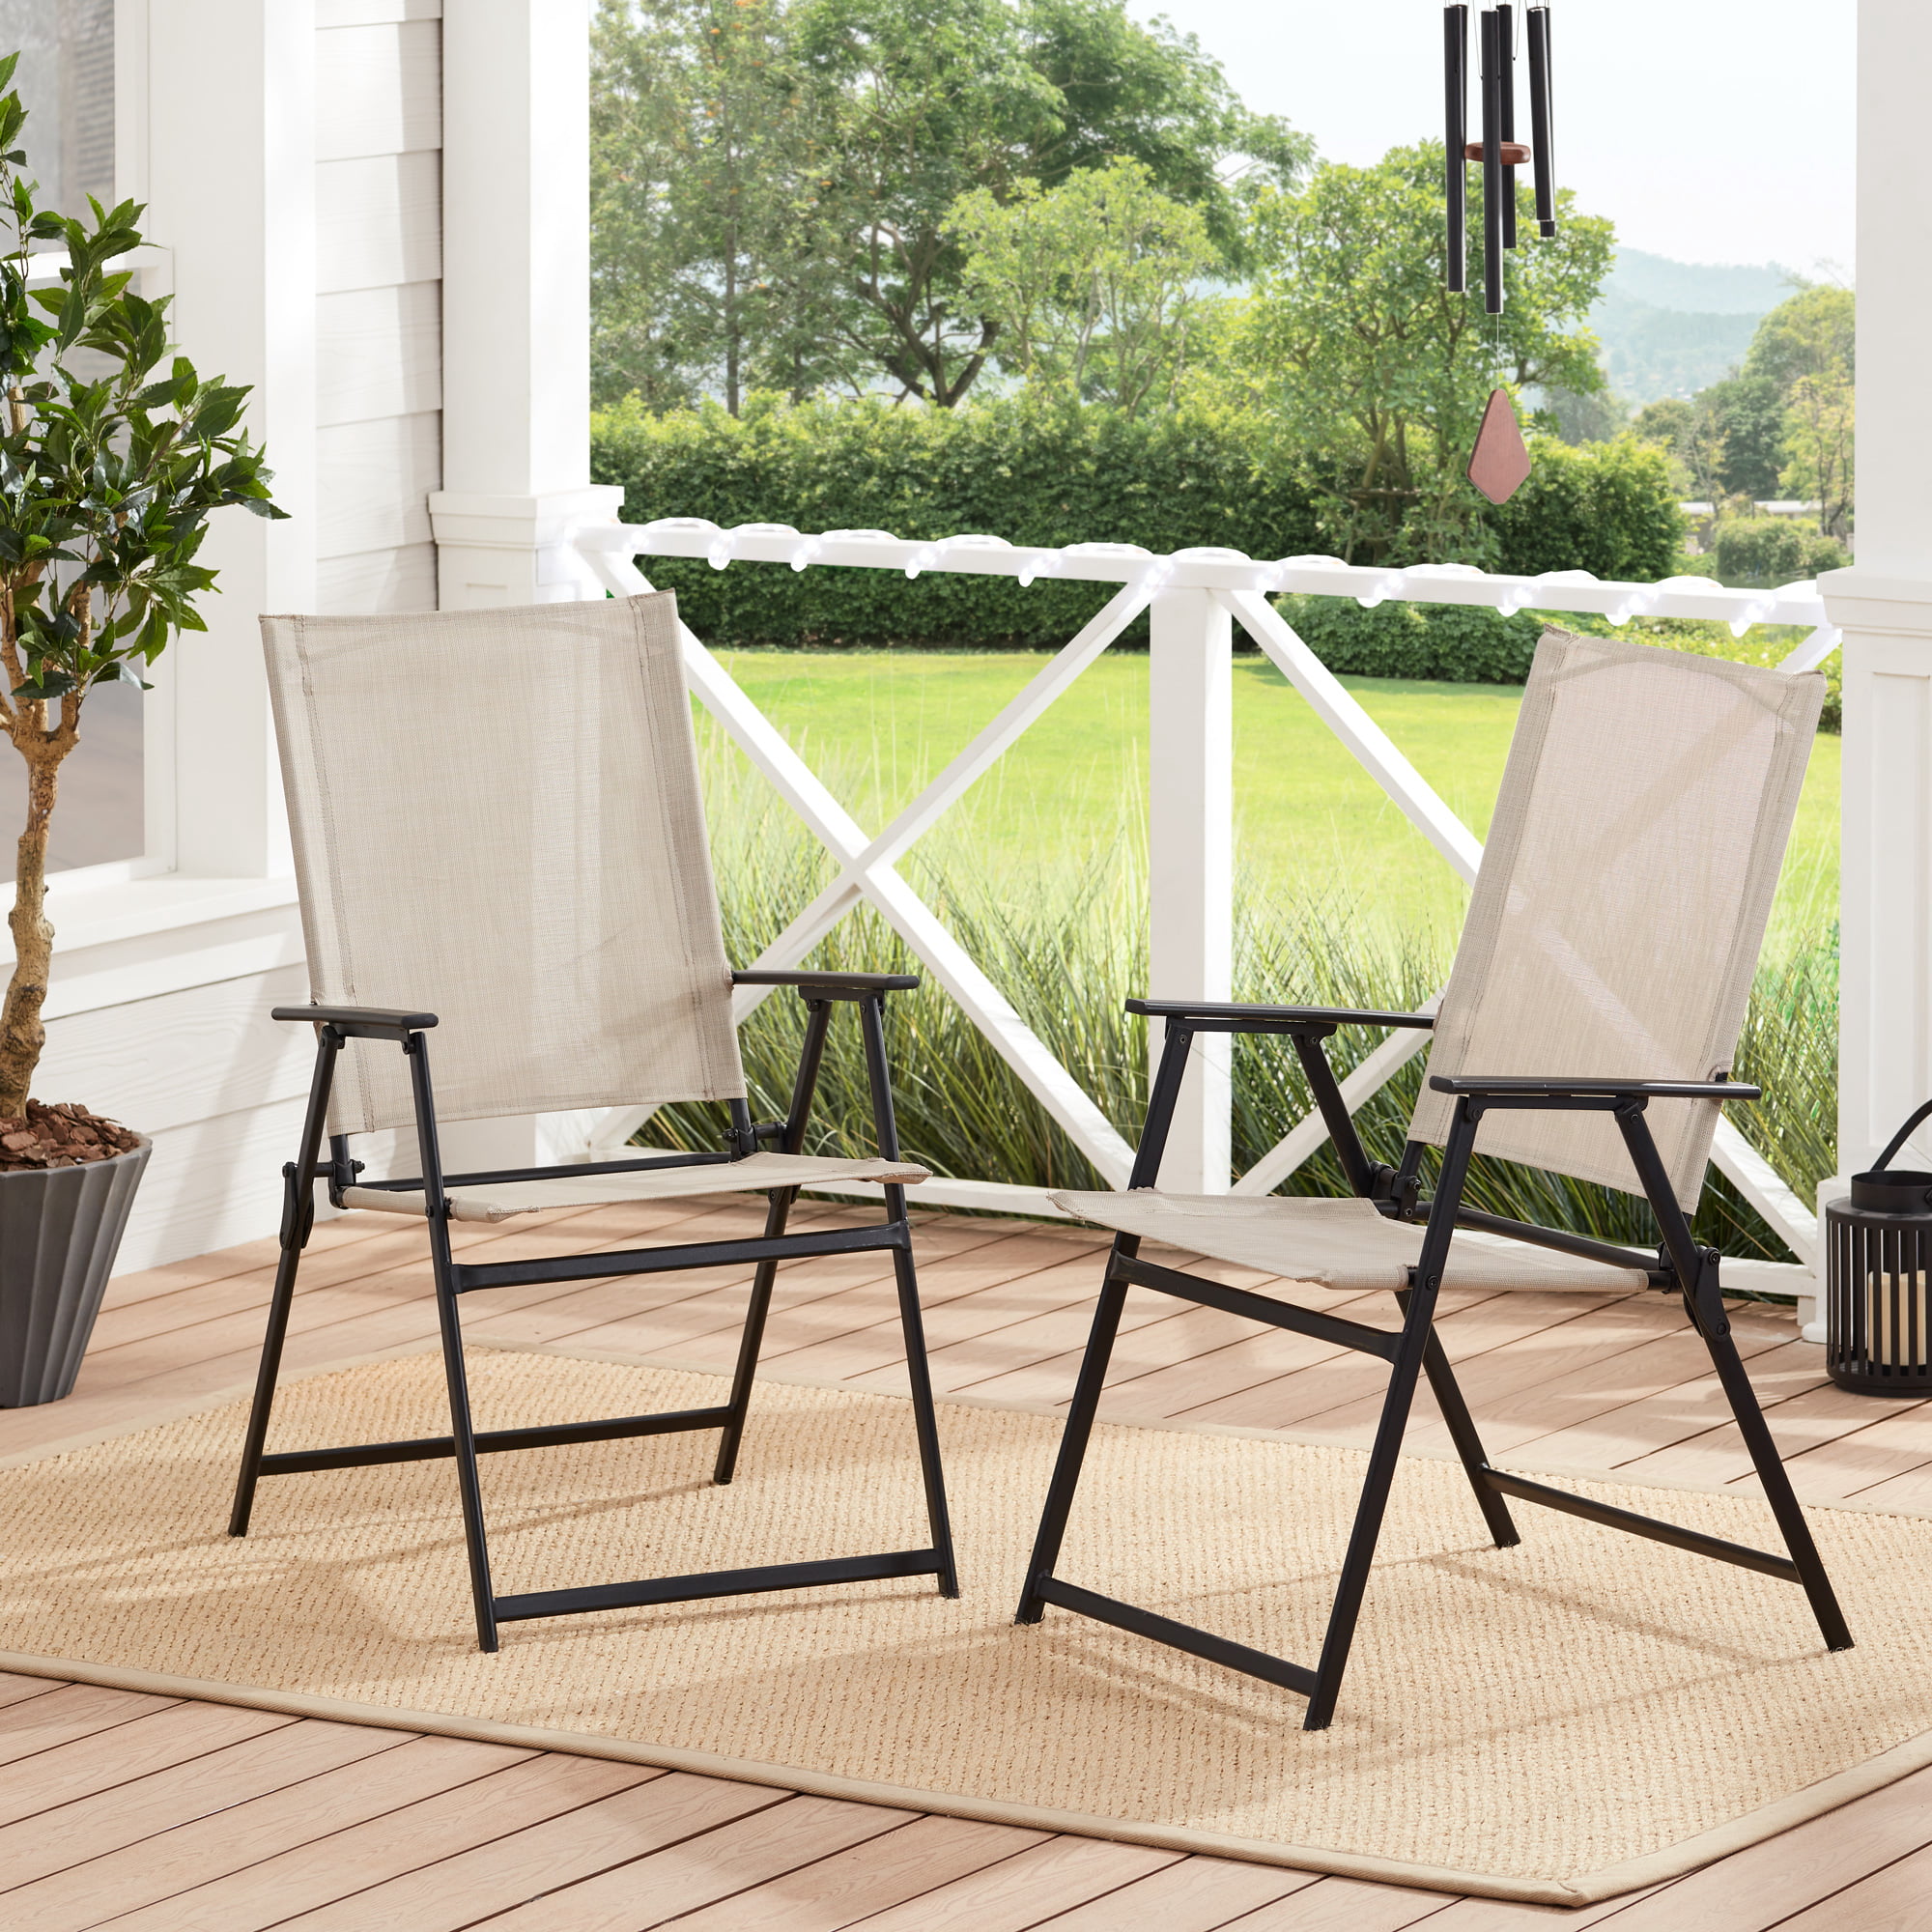 Mainstays Greyson Square Set of 2 Outdoor Patio Steel Sling Folding Chair, Beige